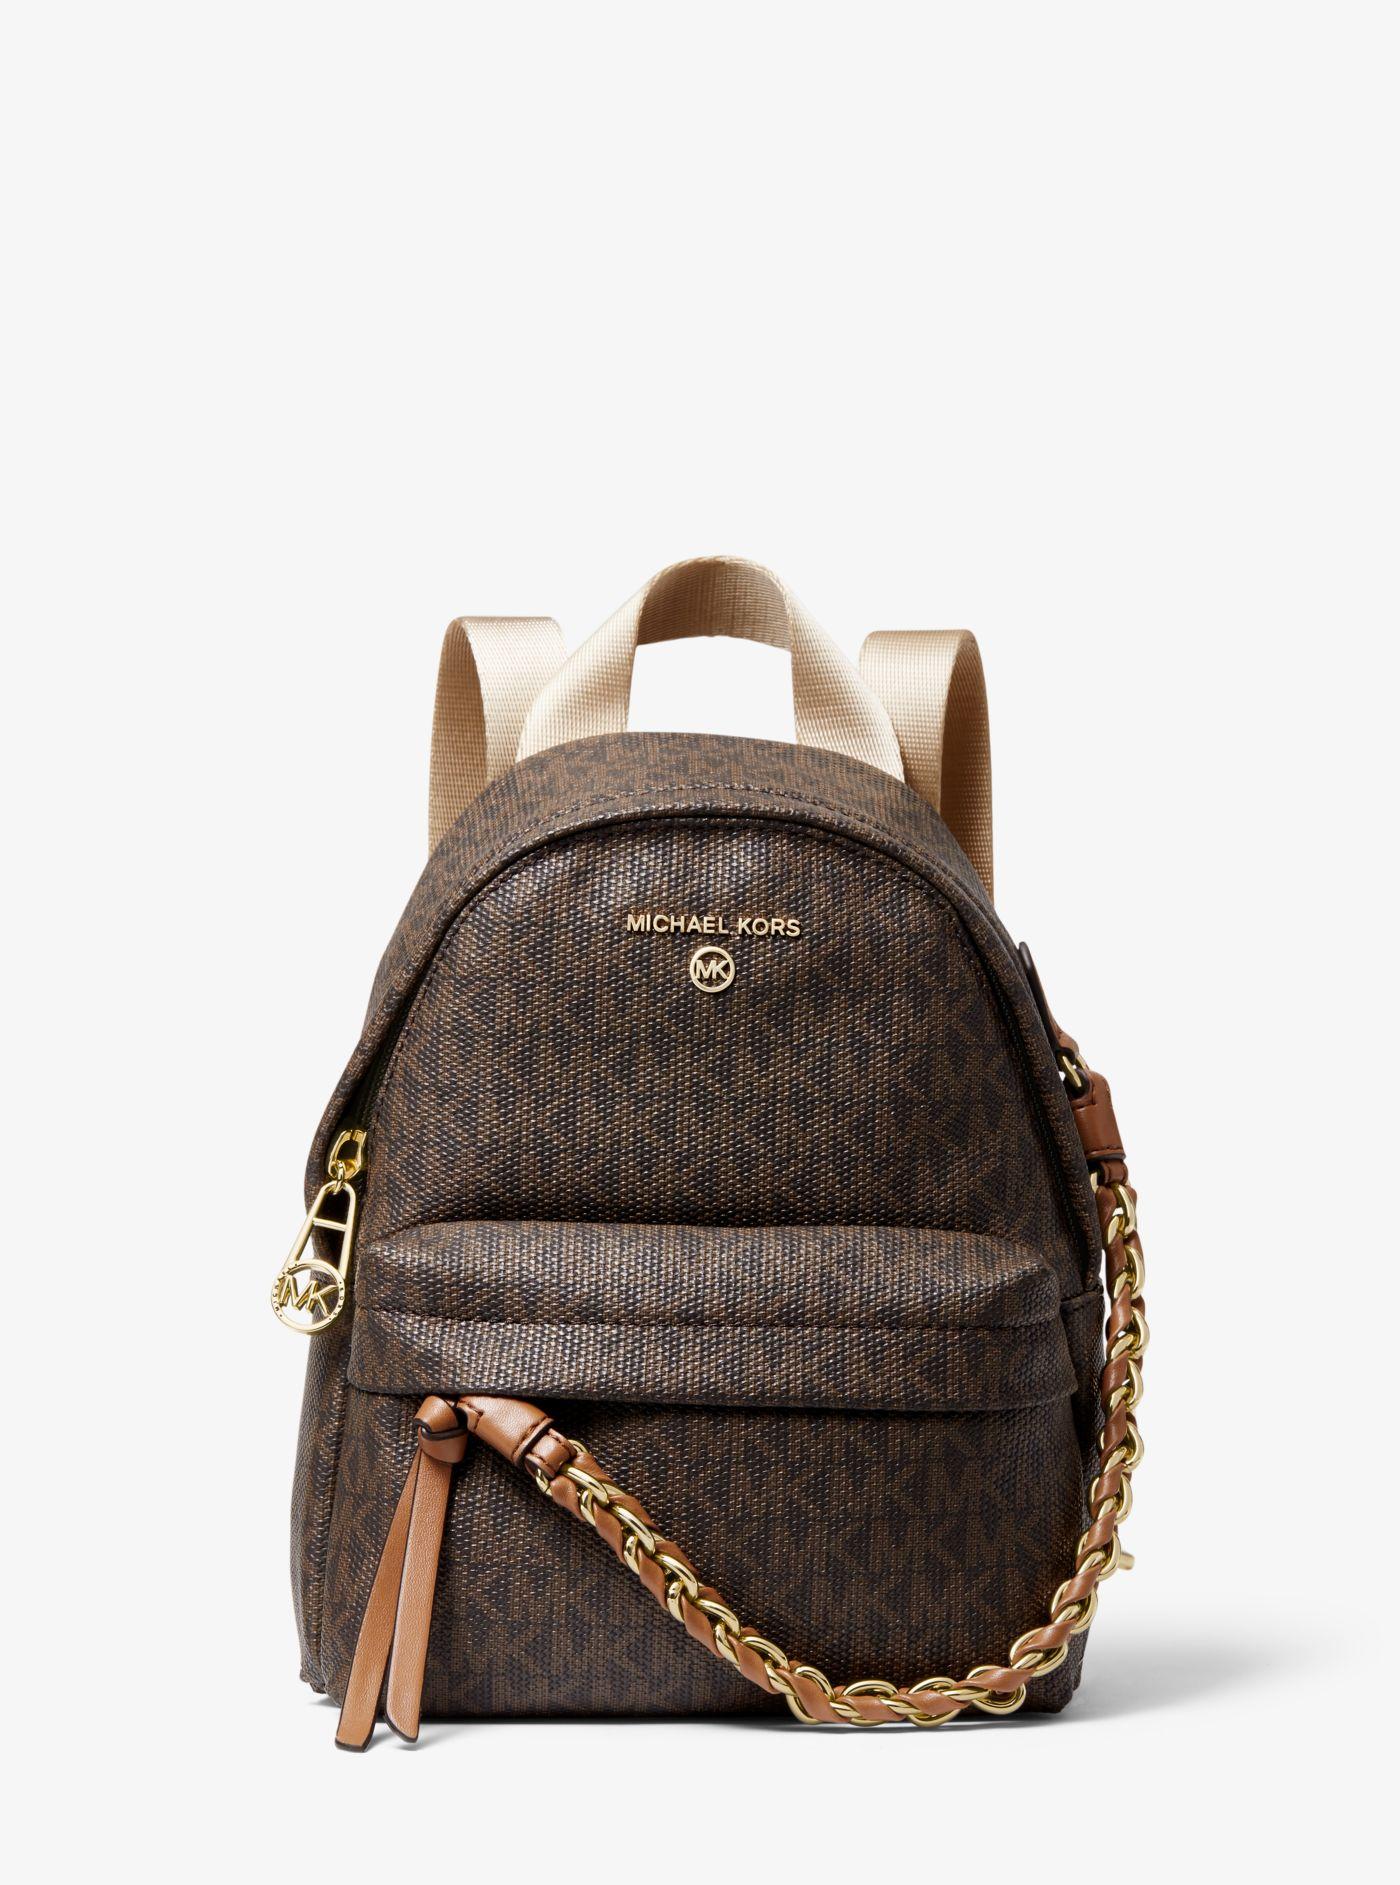 Michael Kors Slater Extra-small Logo Convertible Backpack in Brown